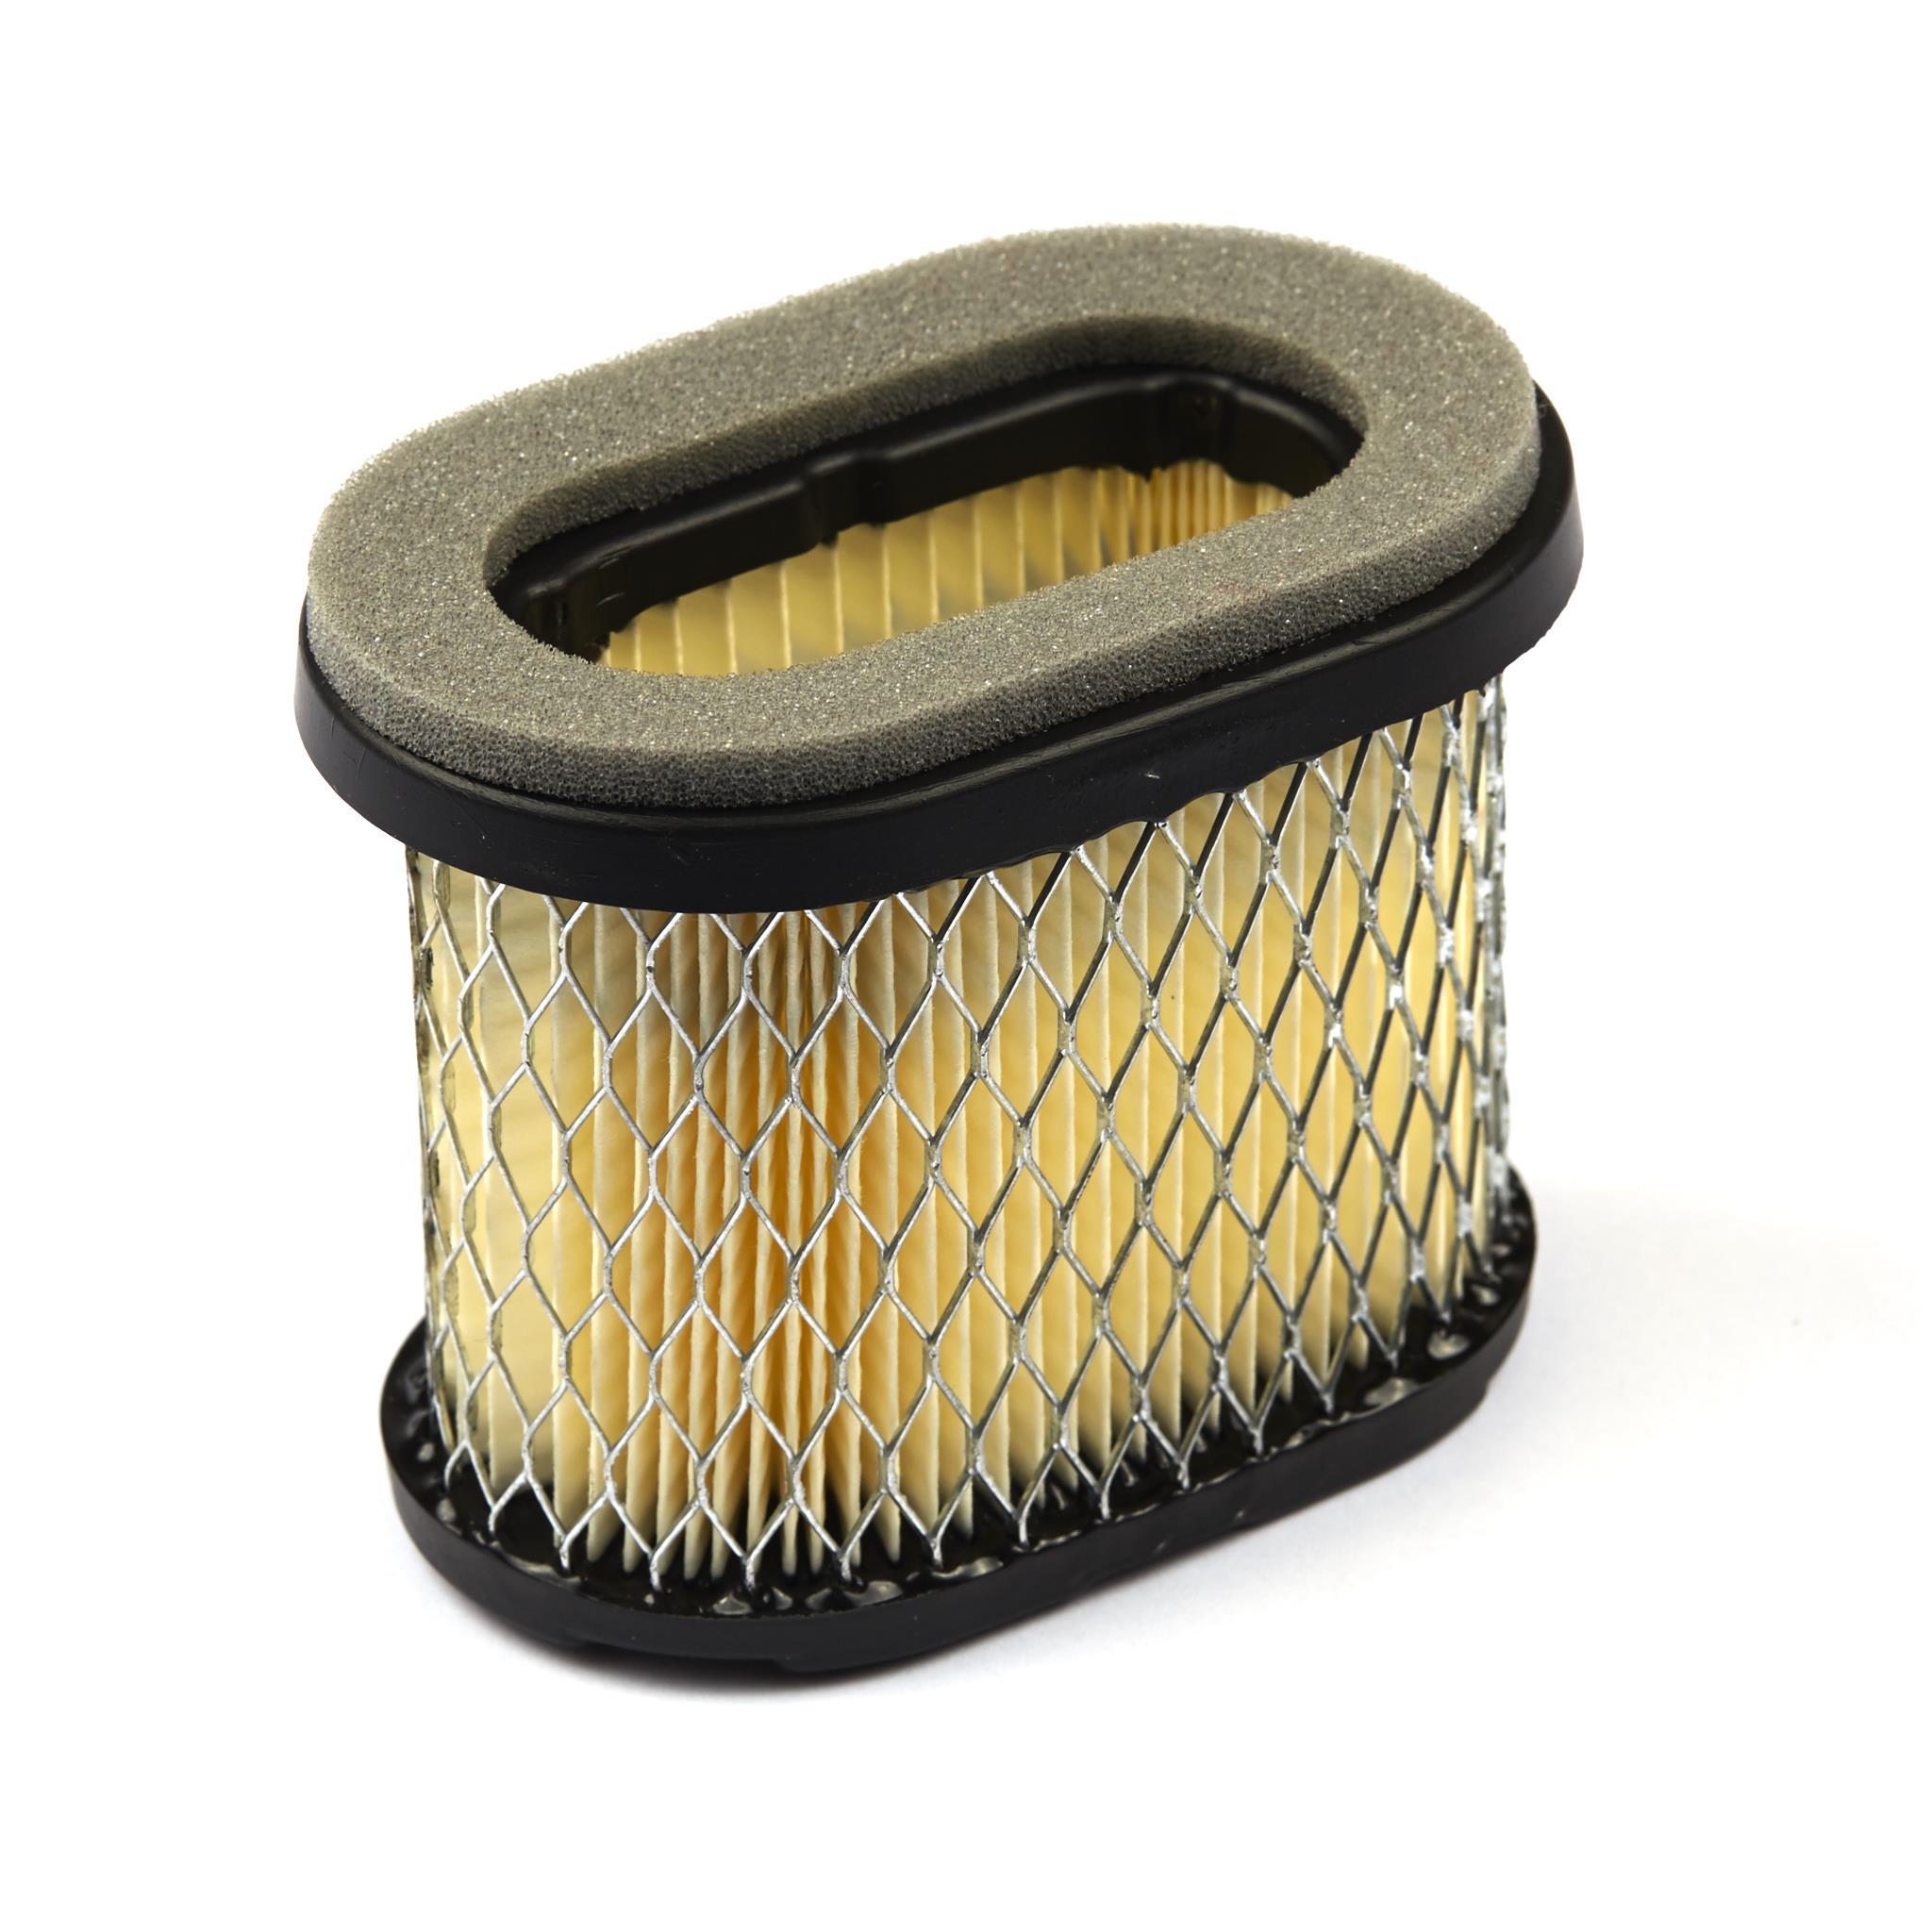  DEF 697014 Air Filter for Briggs & Stratton 697776 697153  695547 697634 698083 797008 794422 795115 John Deere Gy20573 M149171 Lawn  Mower : Automotive